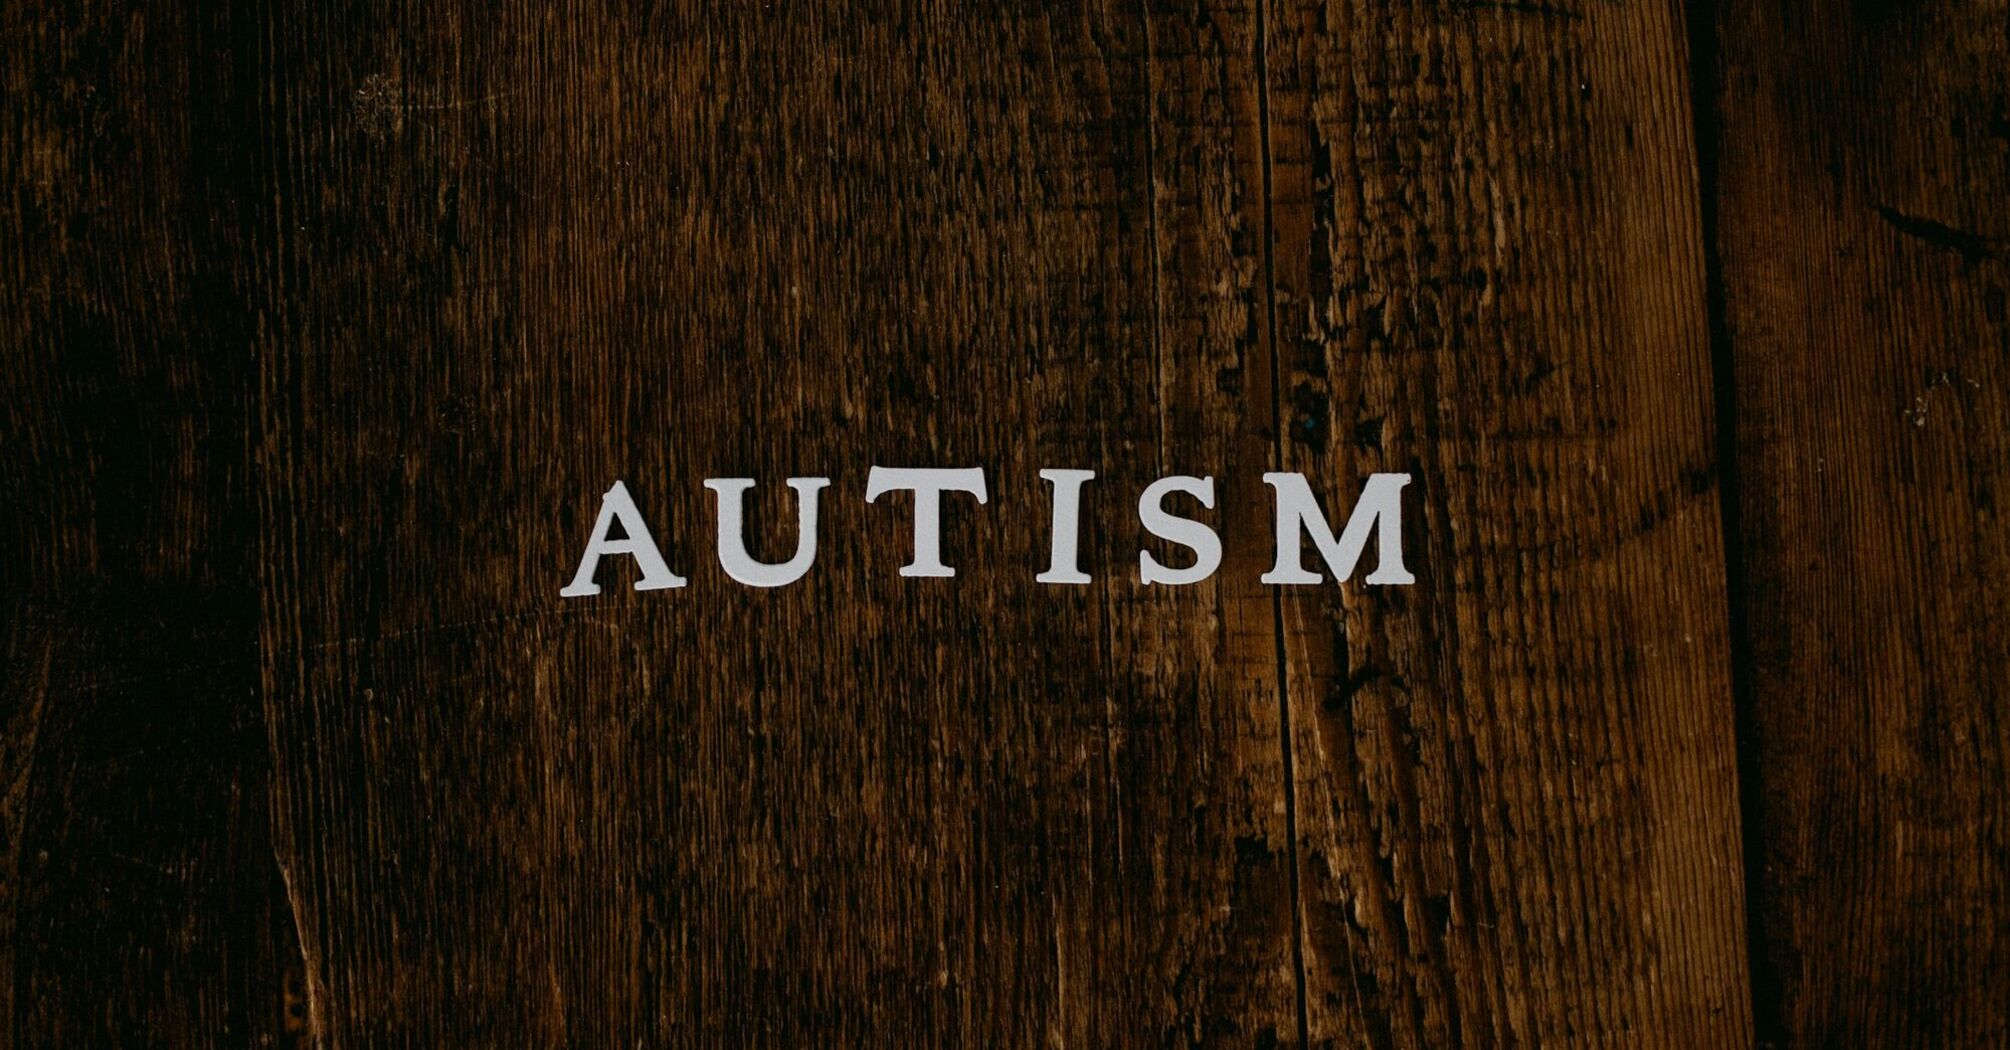 The word 'AUTISM' in white letters on a dark wooden background